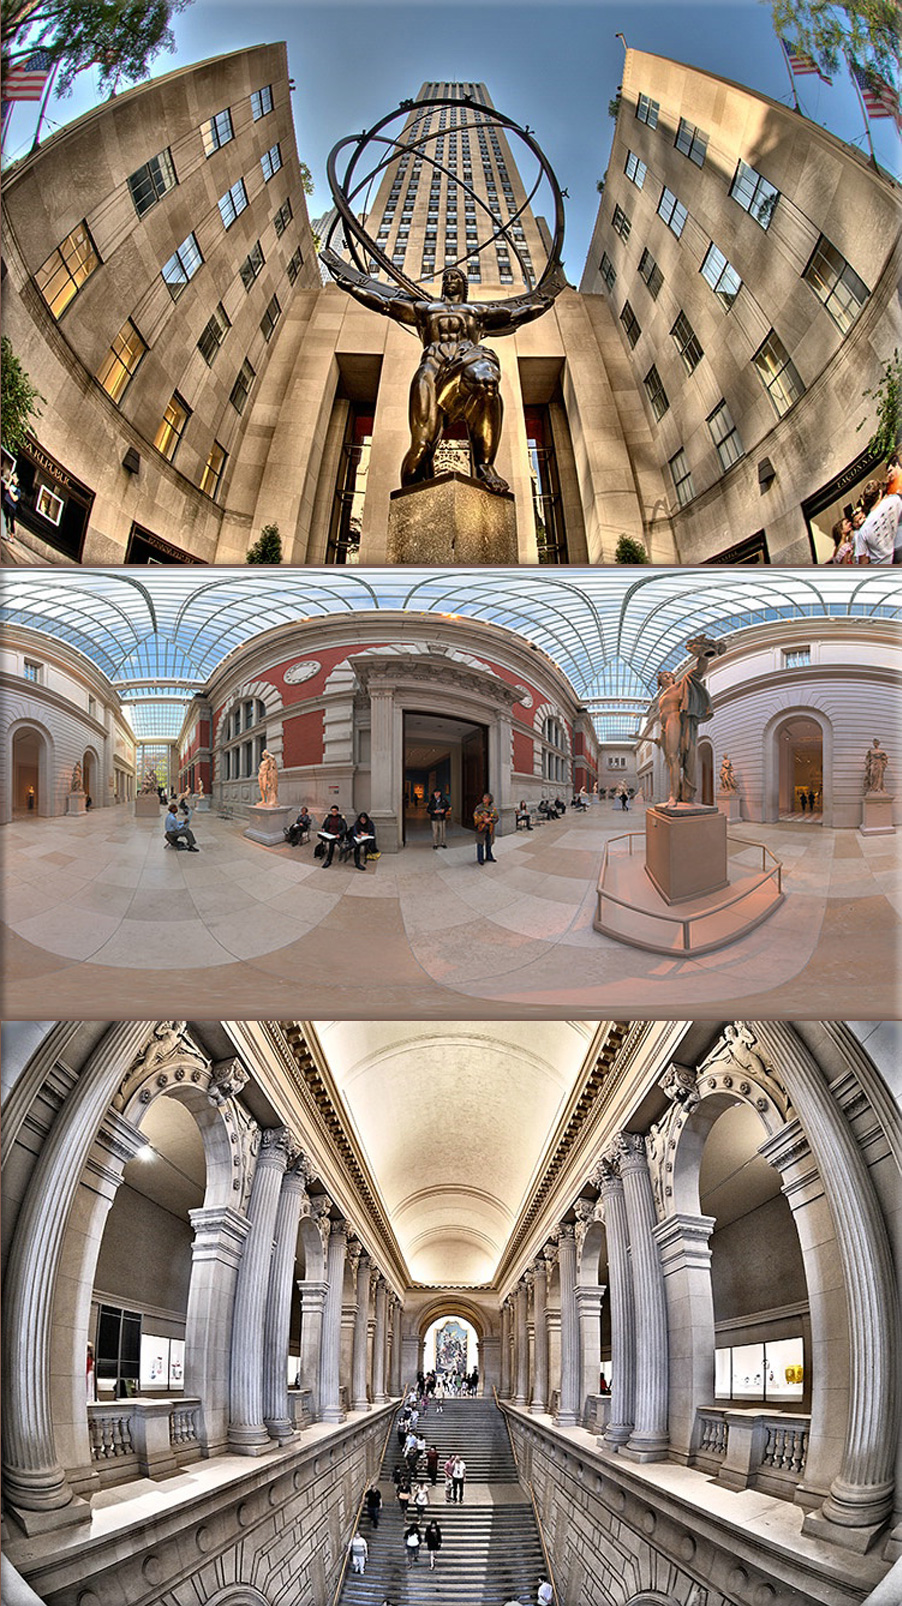 The Metropolitan Museum of Art (colloquially The Met), located in New York City, is the largest art museum in the United States with among the most significant art collections